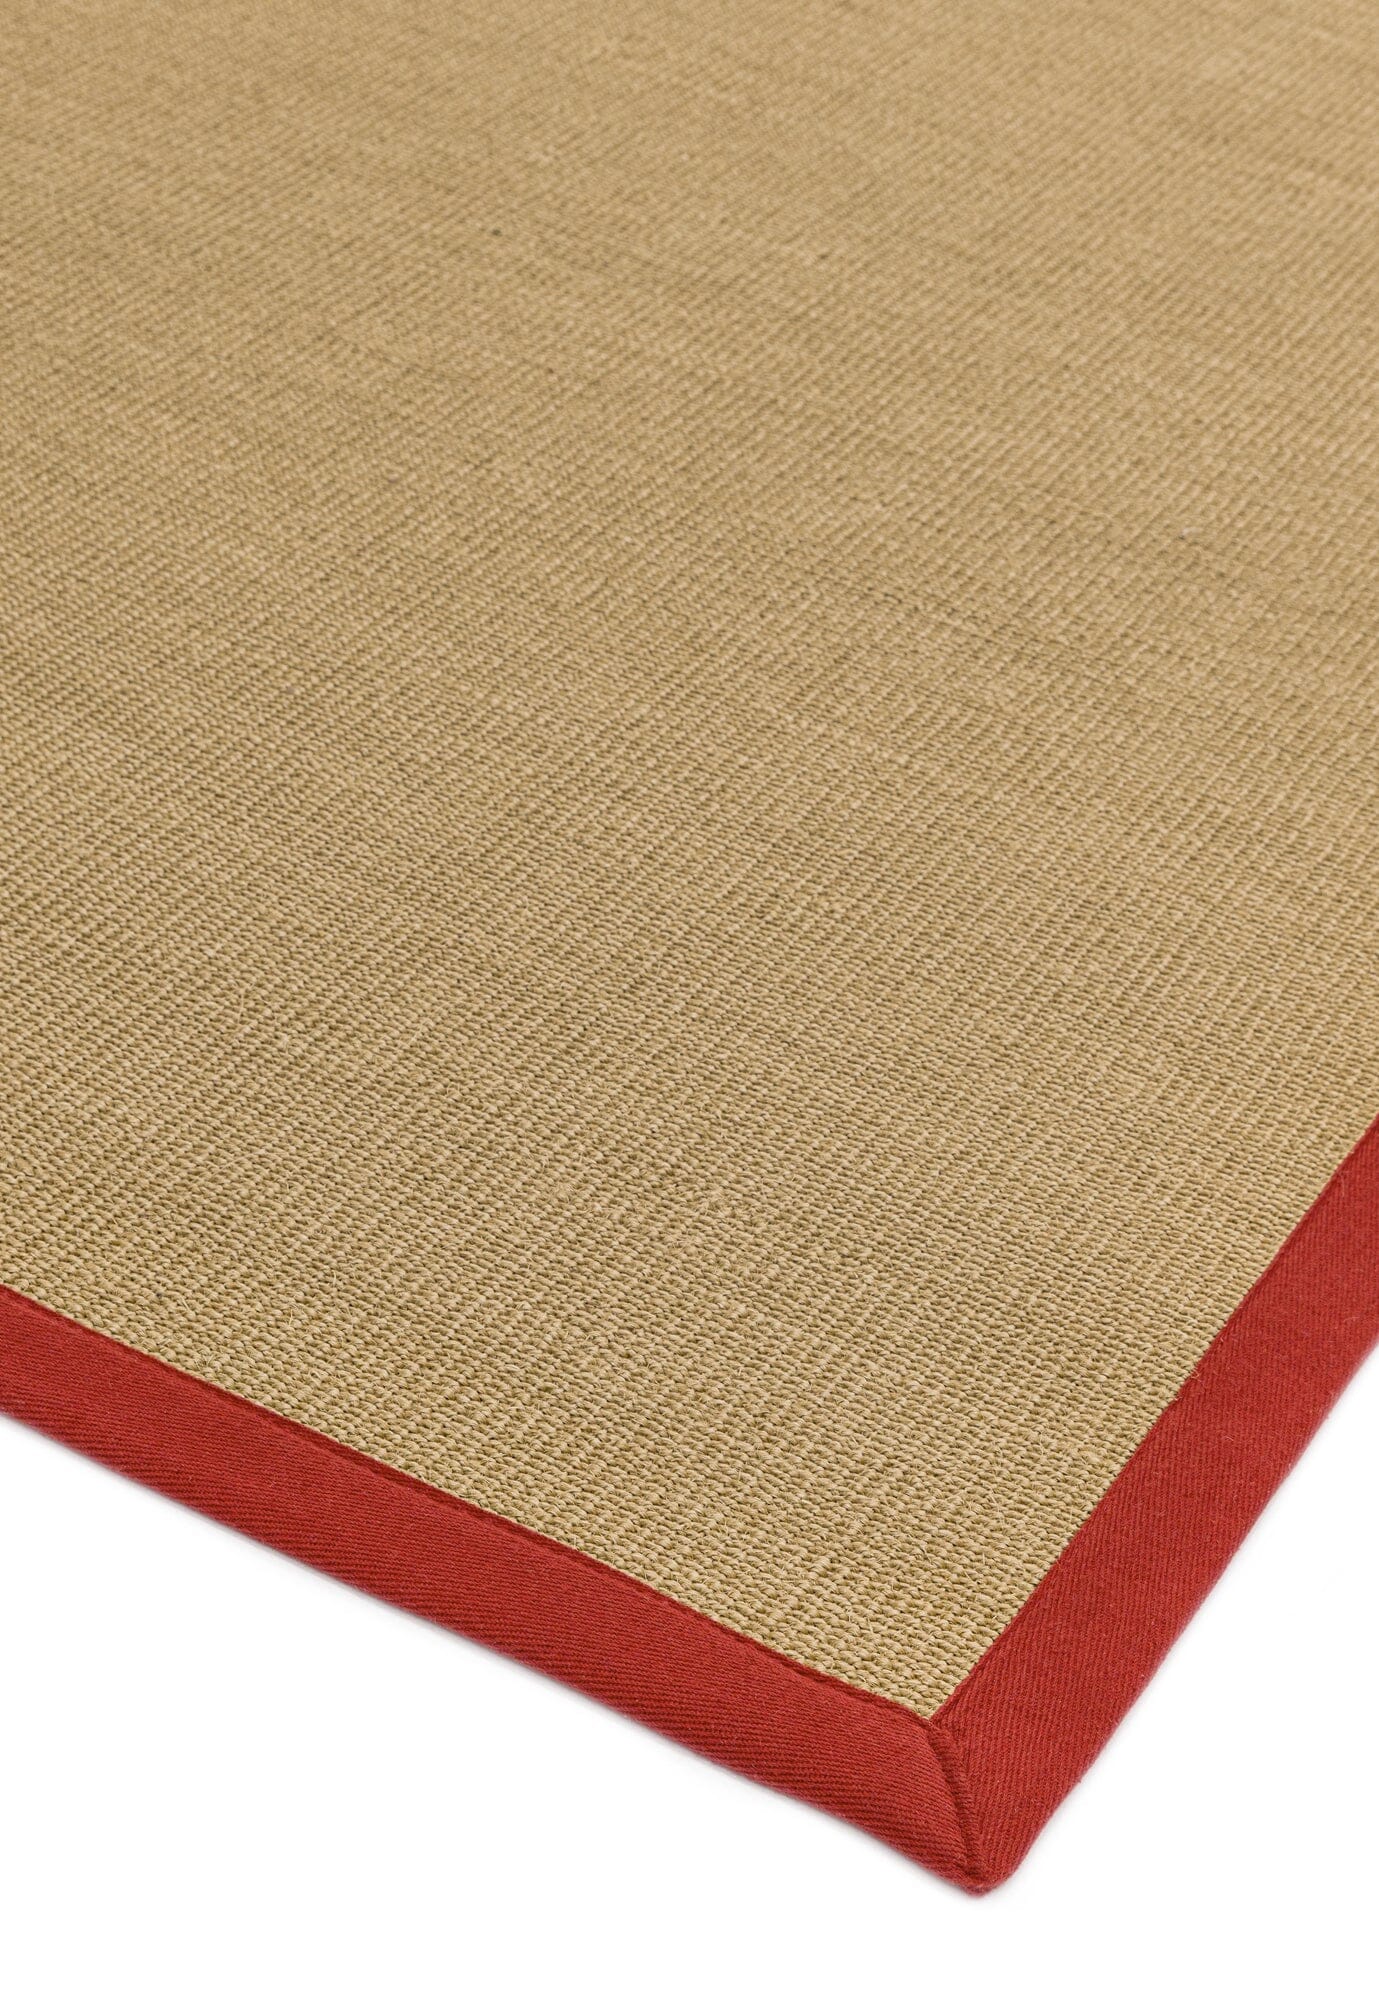 Asiatic Carpets Sisal Machine Woven Rug Linen/Red - 120 x 180cm